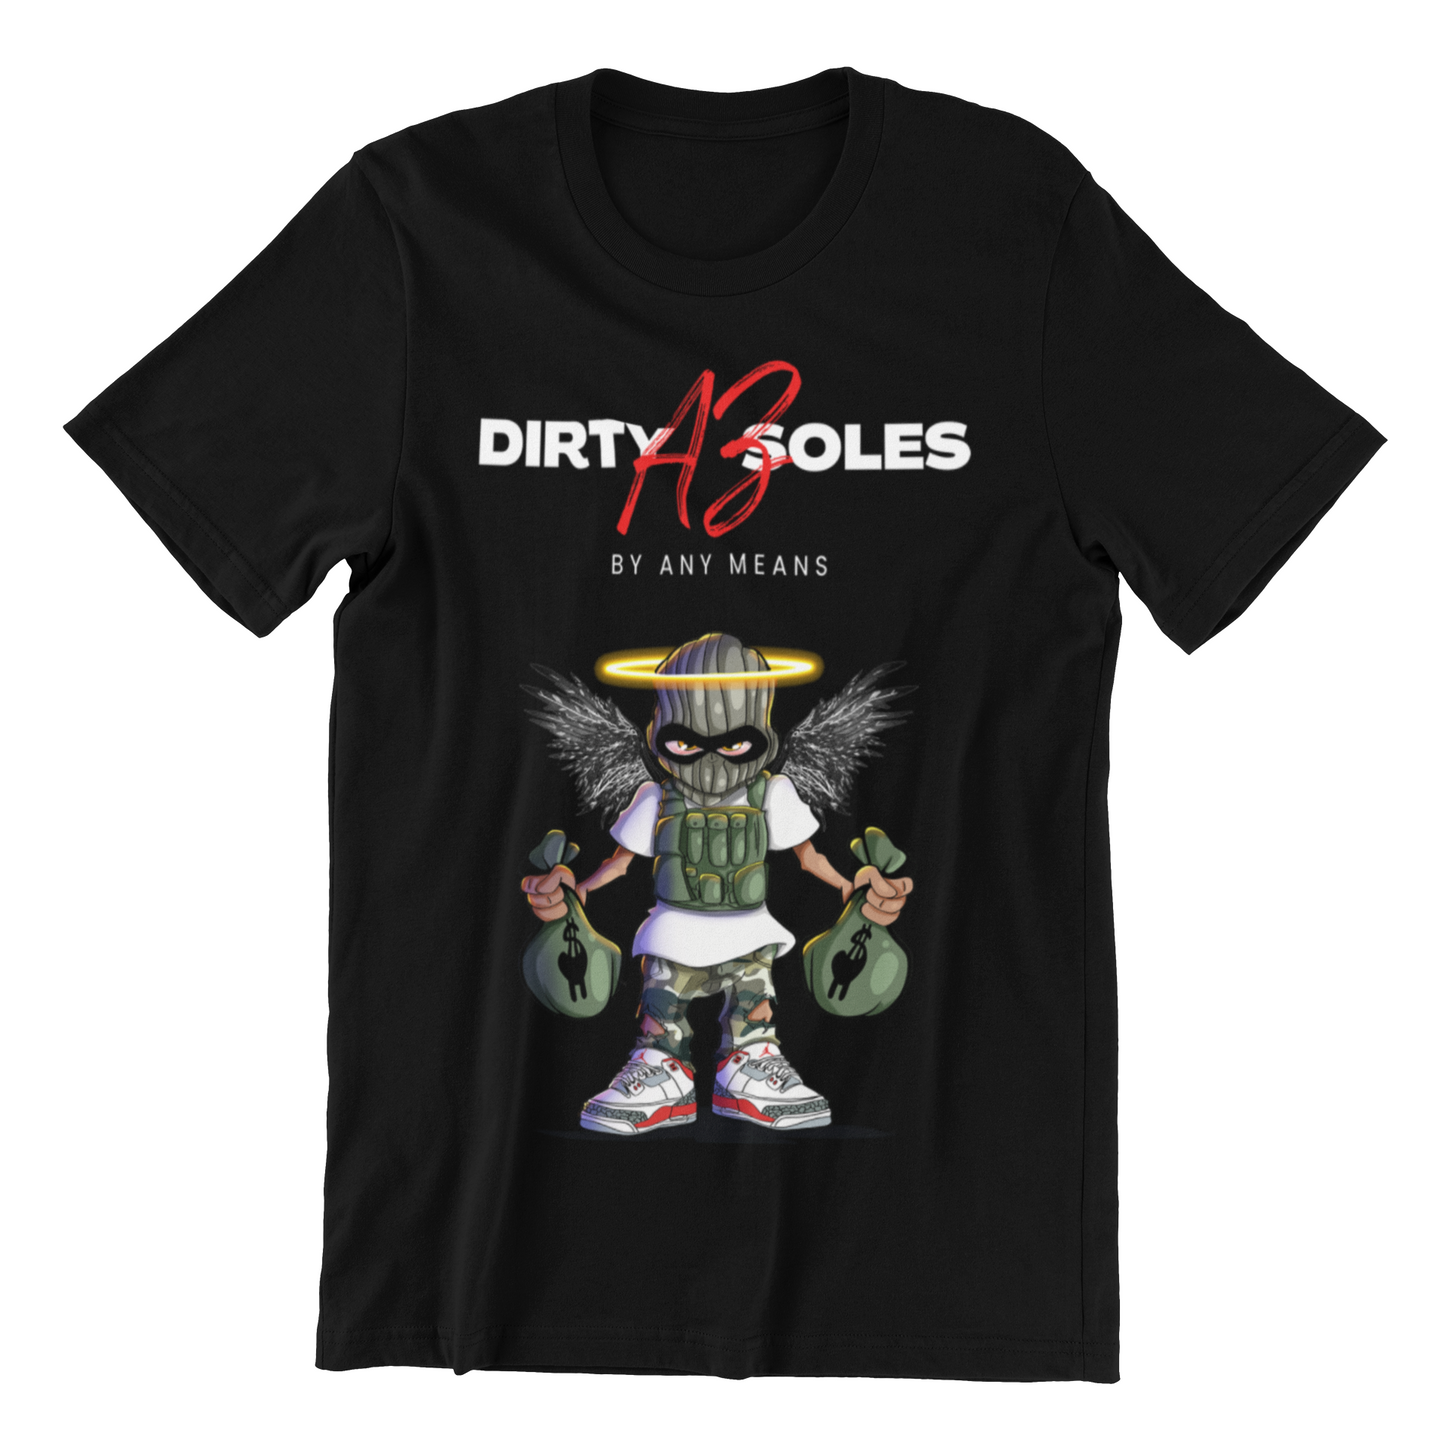 Dirty AZ Soles "By Any Means" - Hustler Inspired T-Shirt